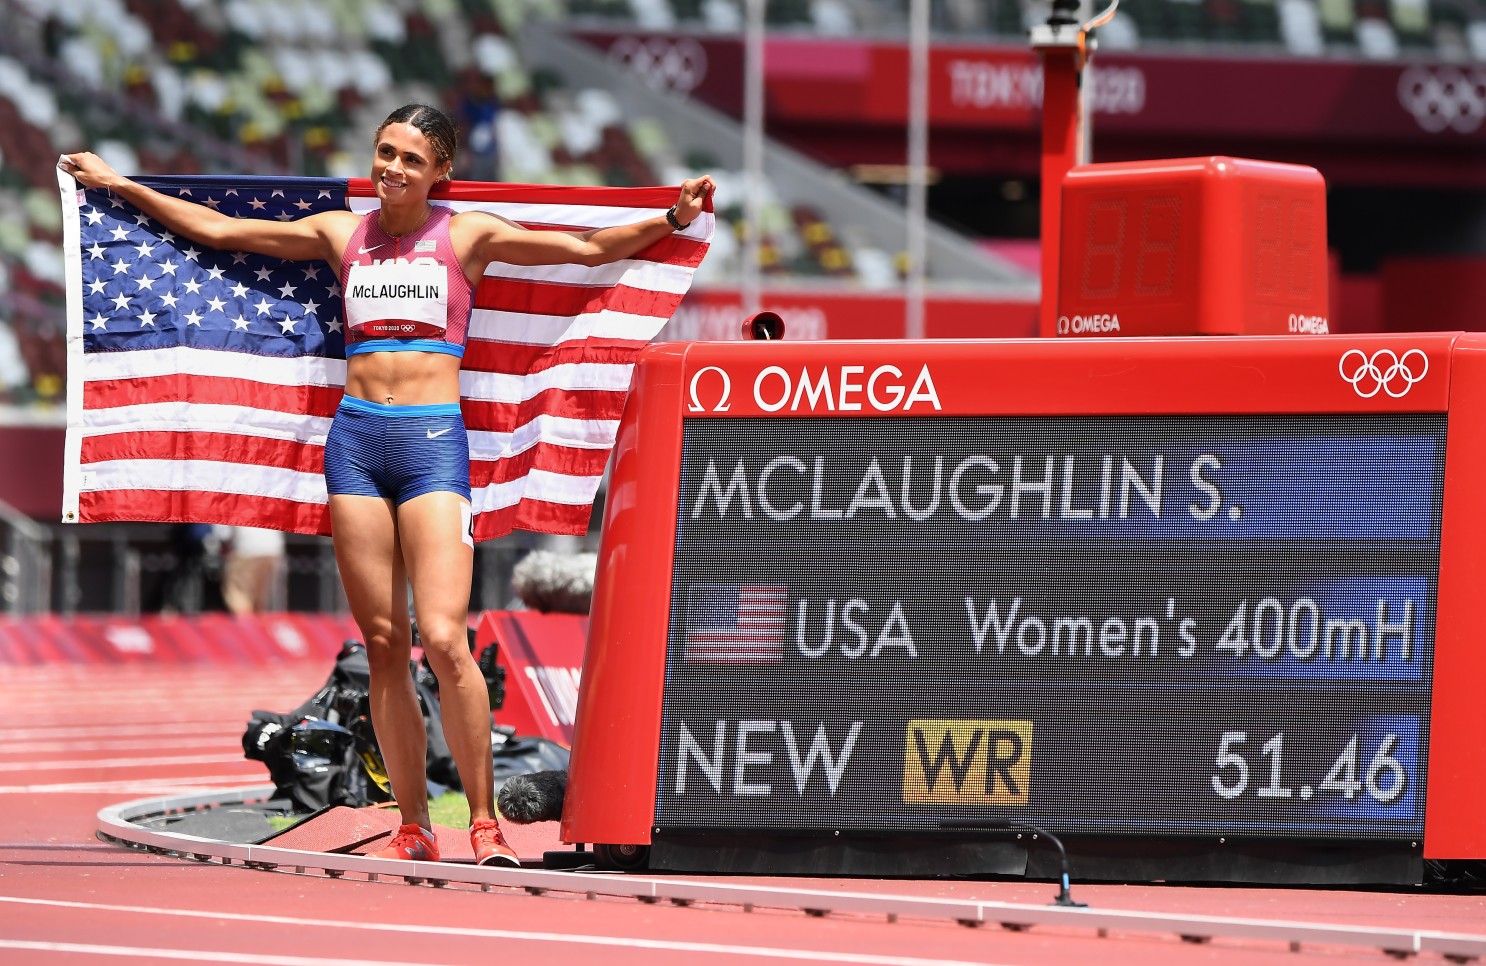 McLaughlin Smashes Own World Record in Epic Women’s 400m Hurdles Final